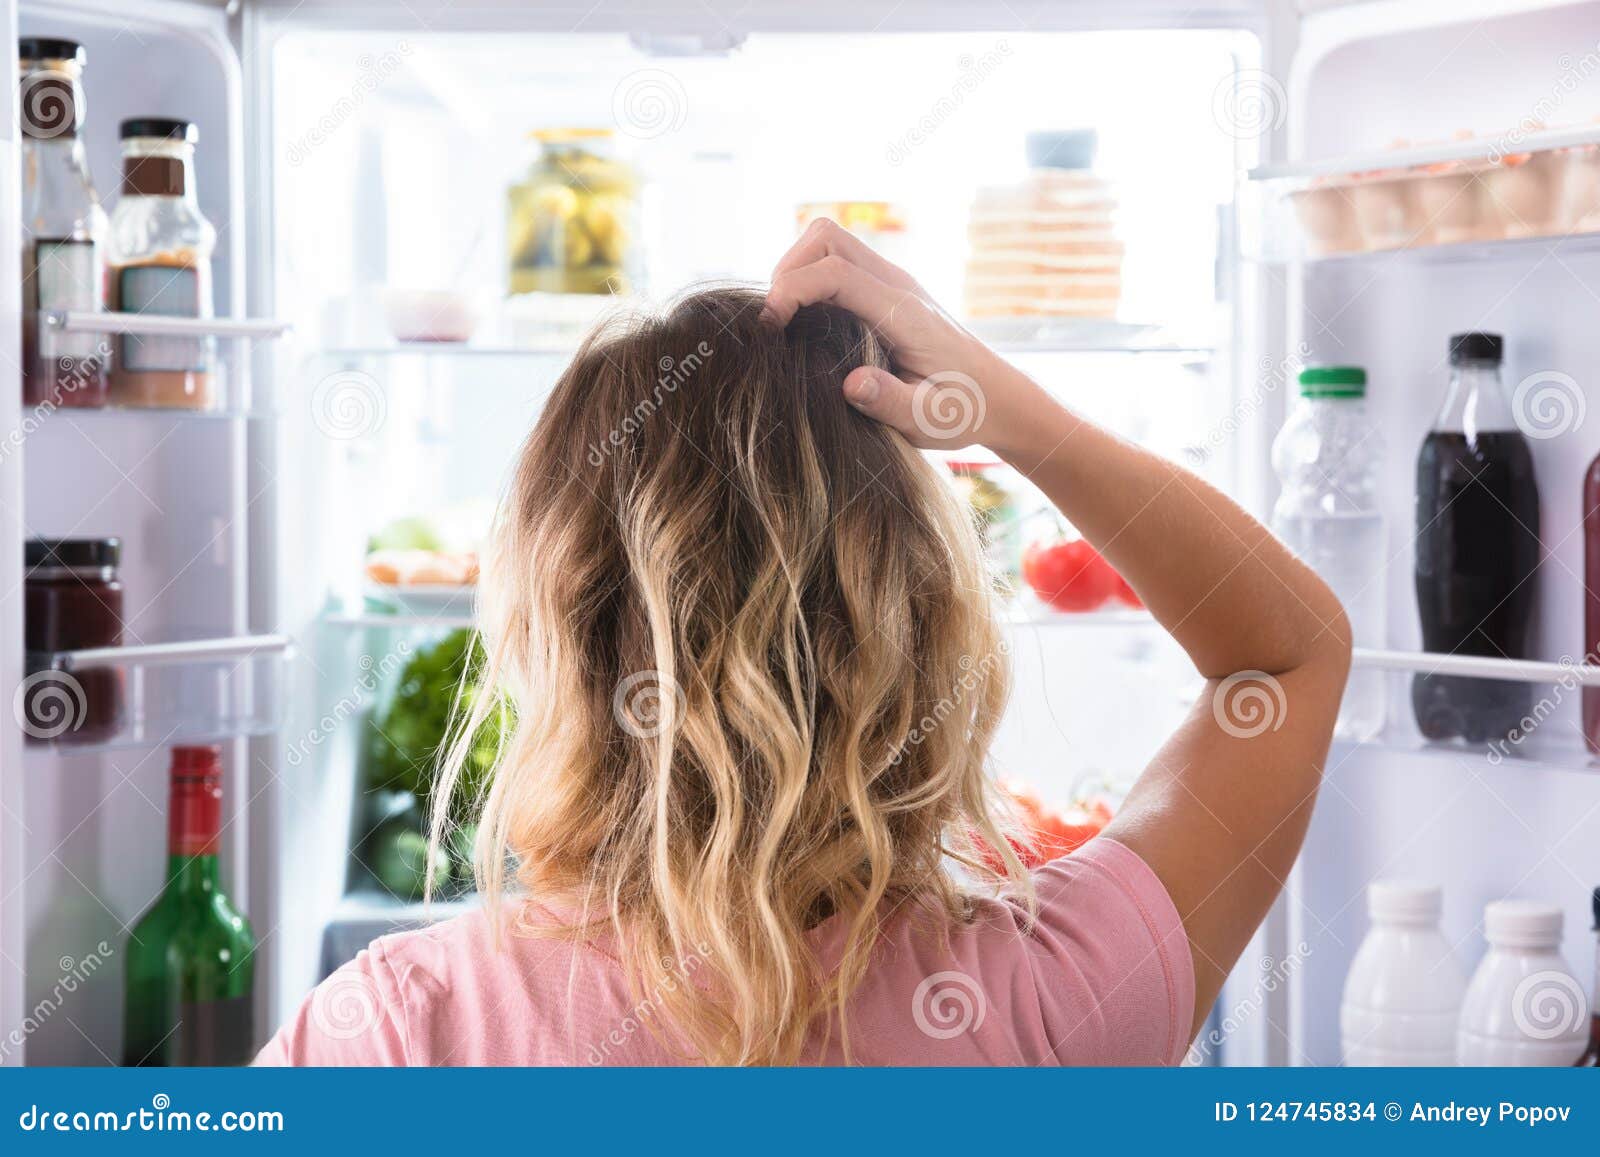 confused woman looking in open refrigerator